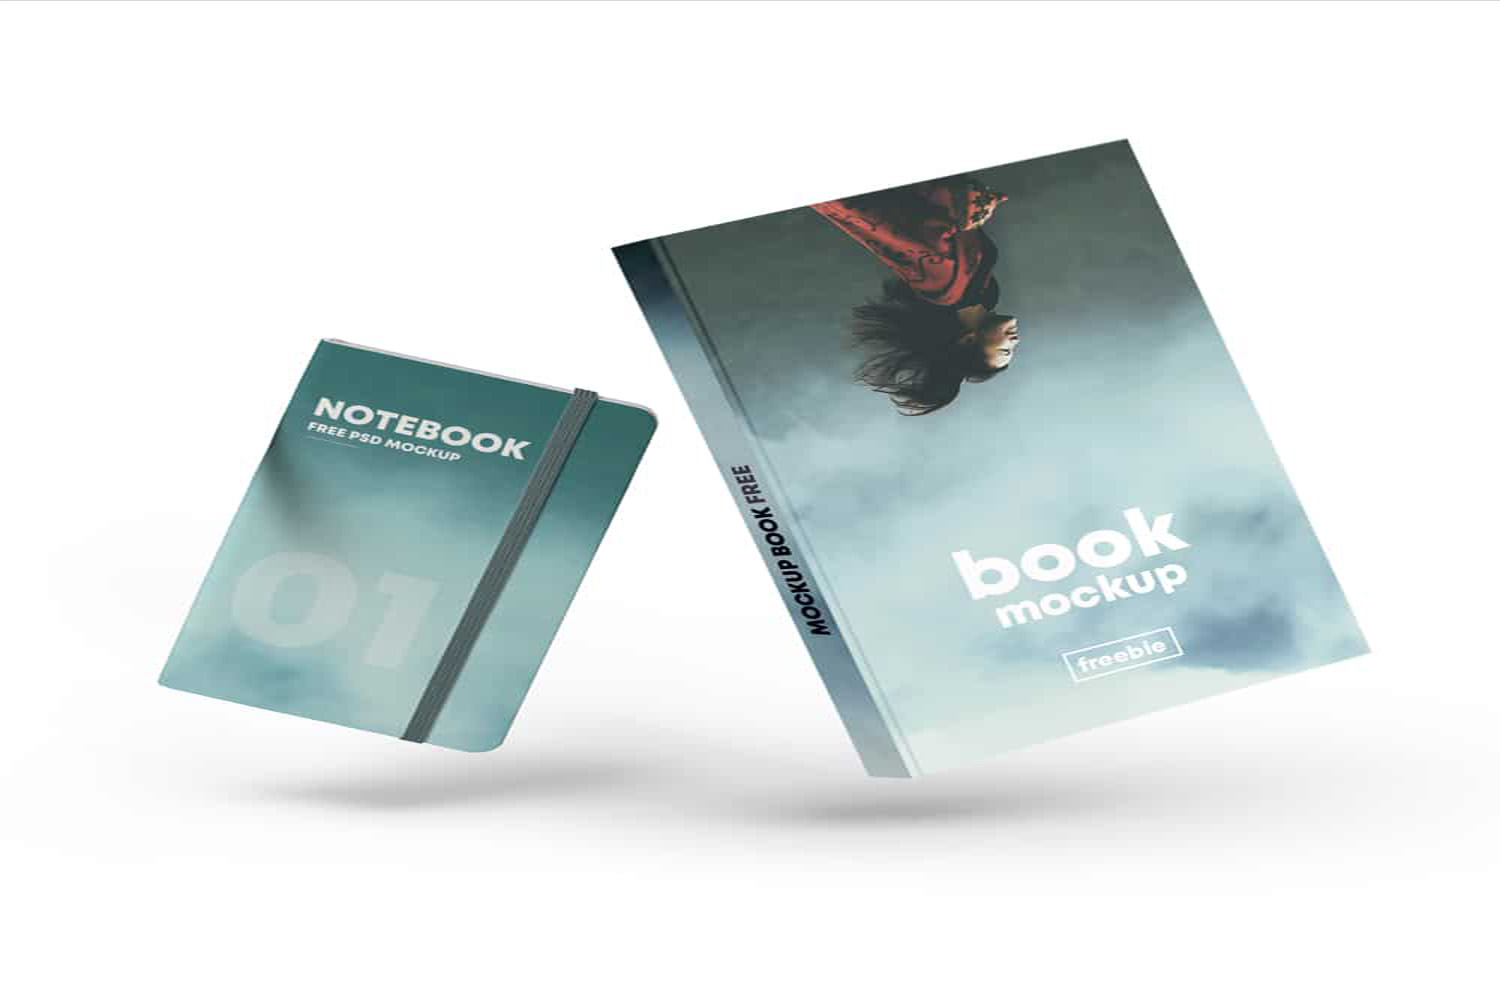 Floating Book Cover & Notebook Mockup Free Download